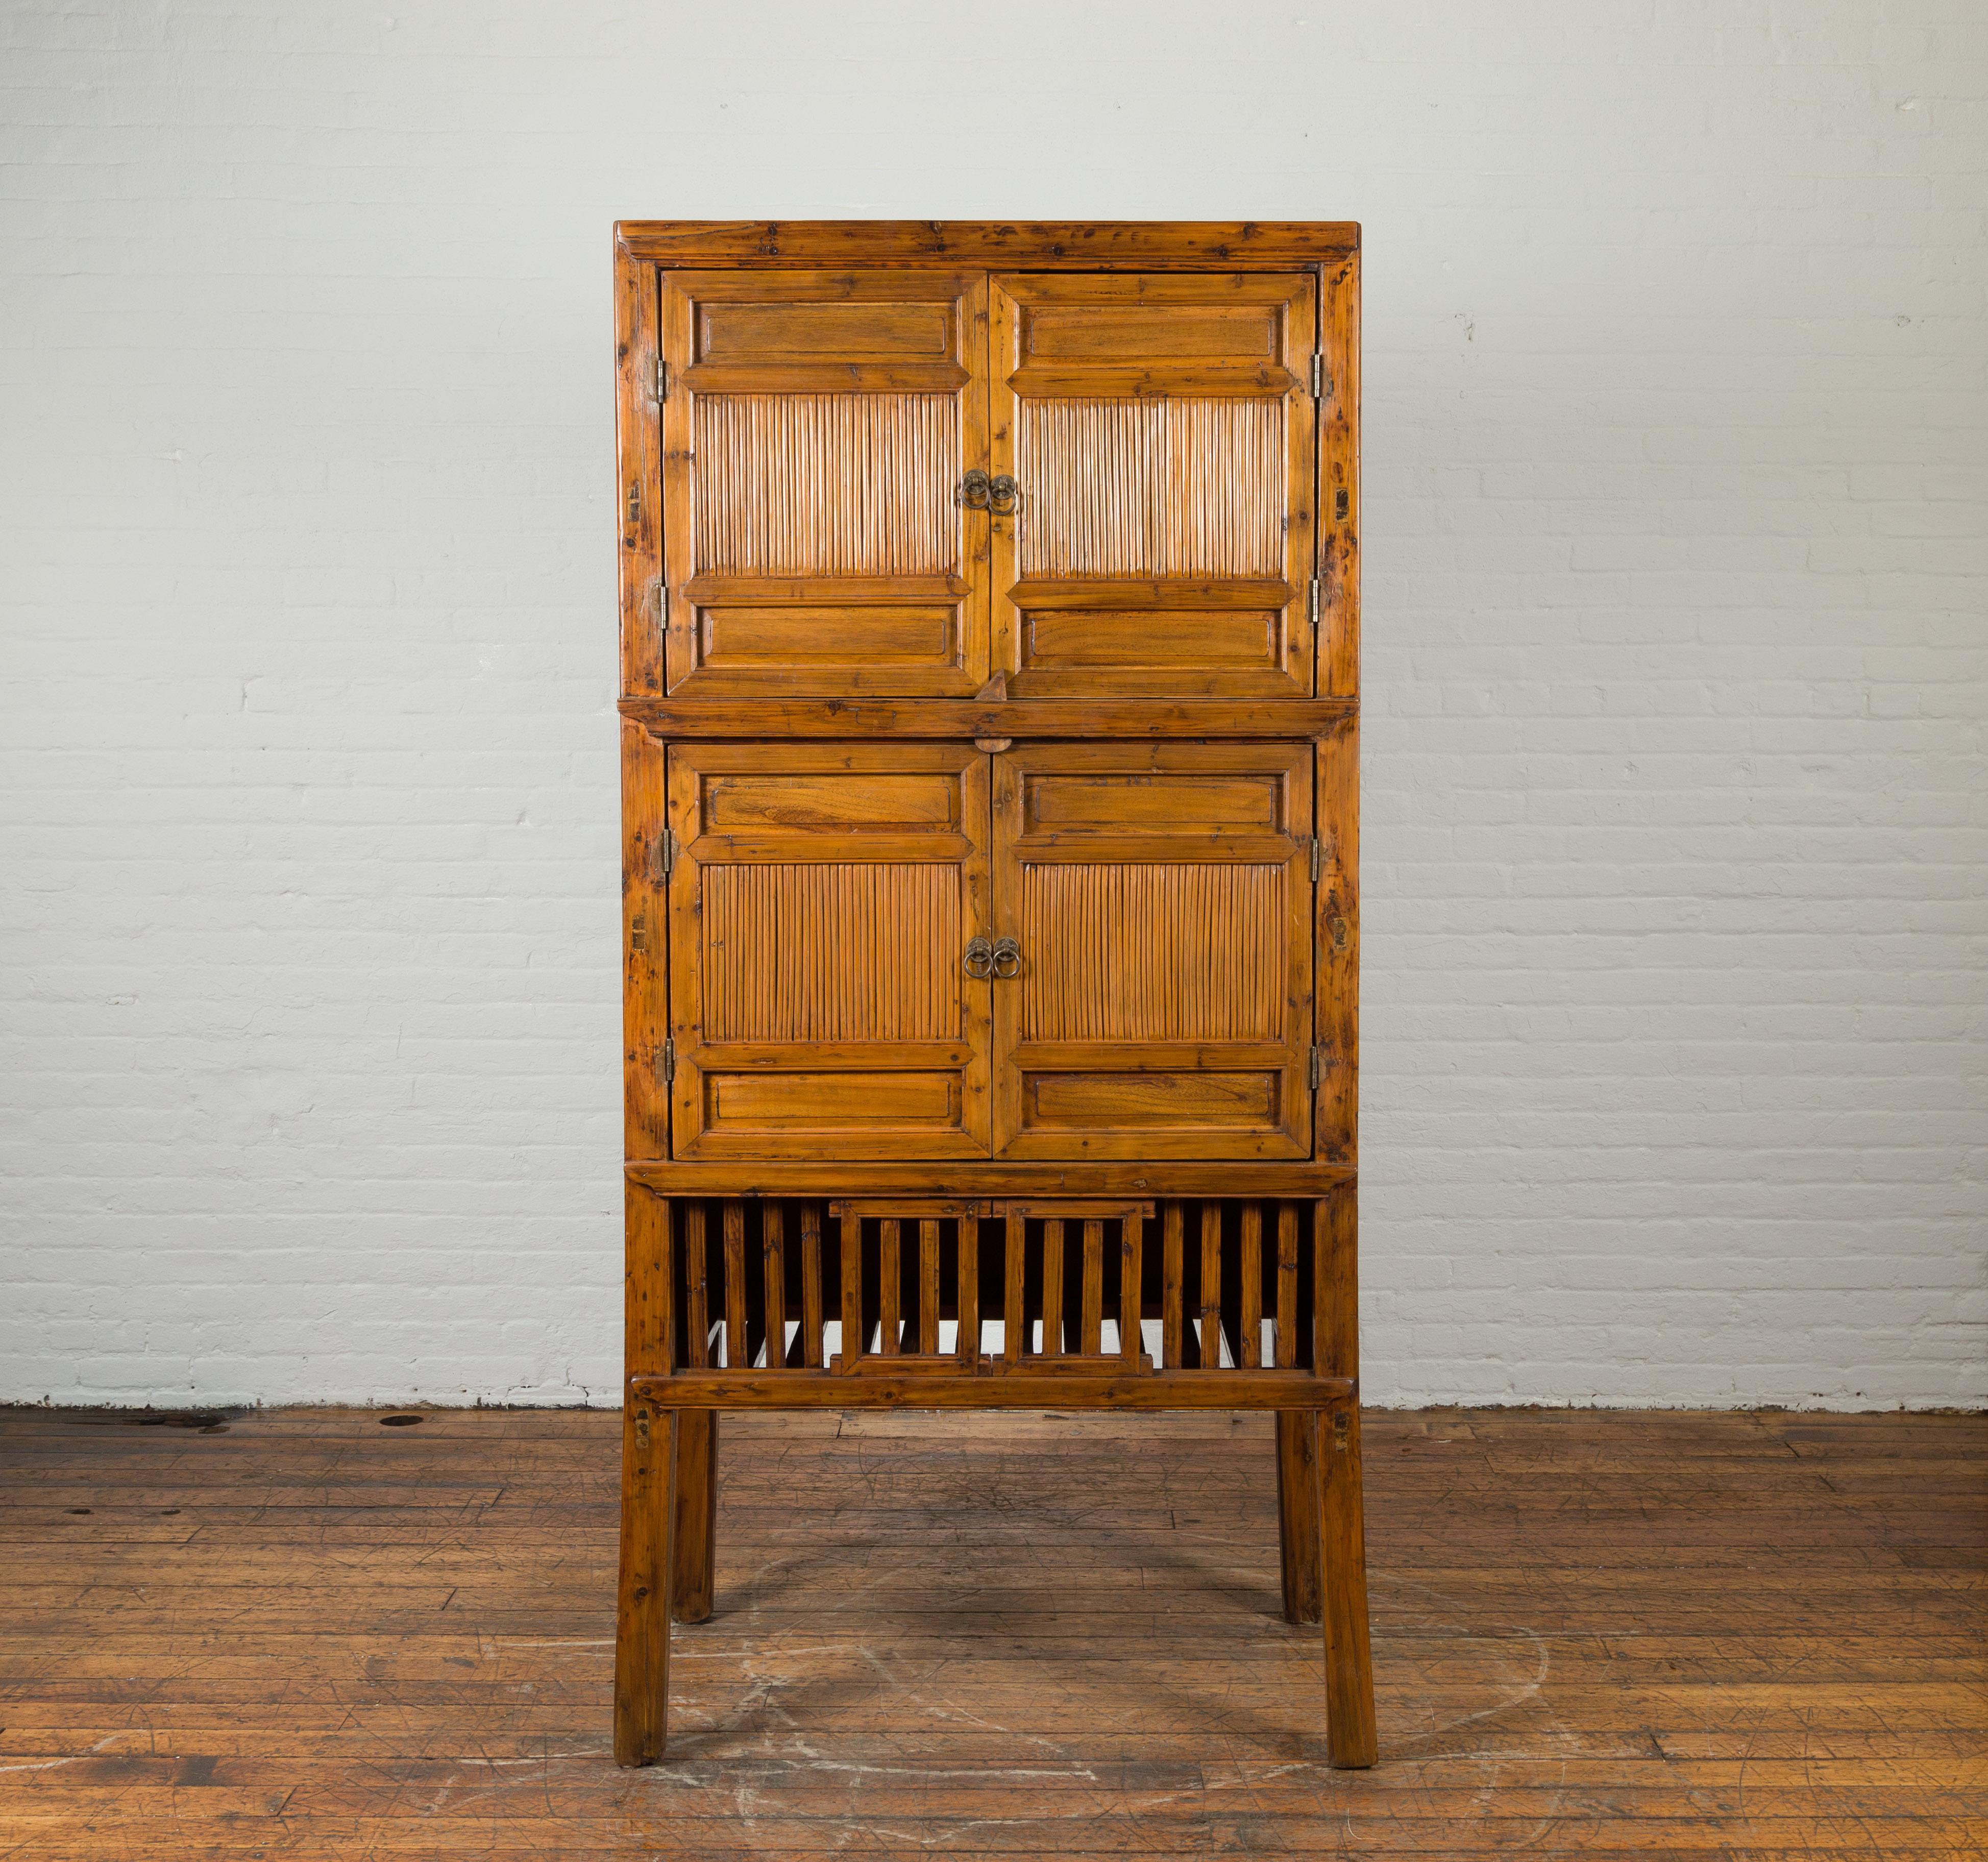 A Chinese vintage wood and bamboo cabinet from the mid 20th century, with double doors and openwork apron. Created in China during the midcentury period, this bamboo cabinet features two pairs of double doors alternating recessed panels and bamboo